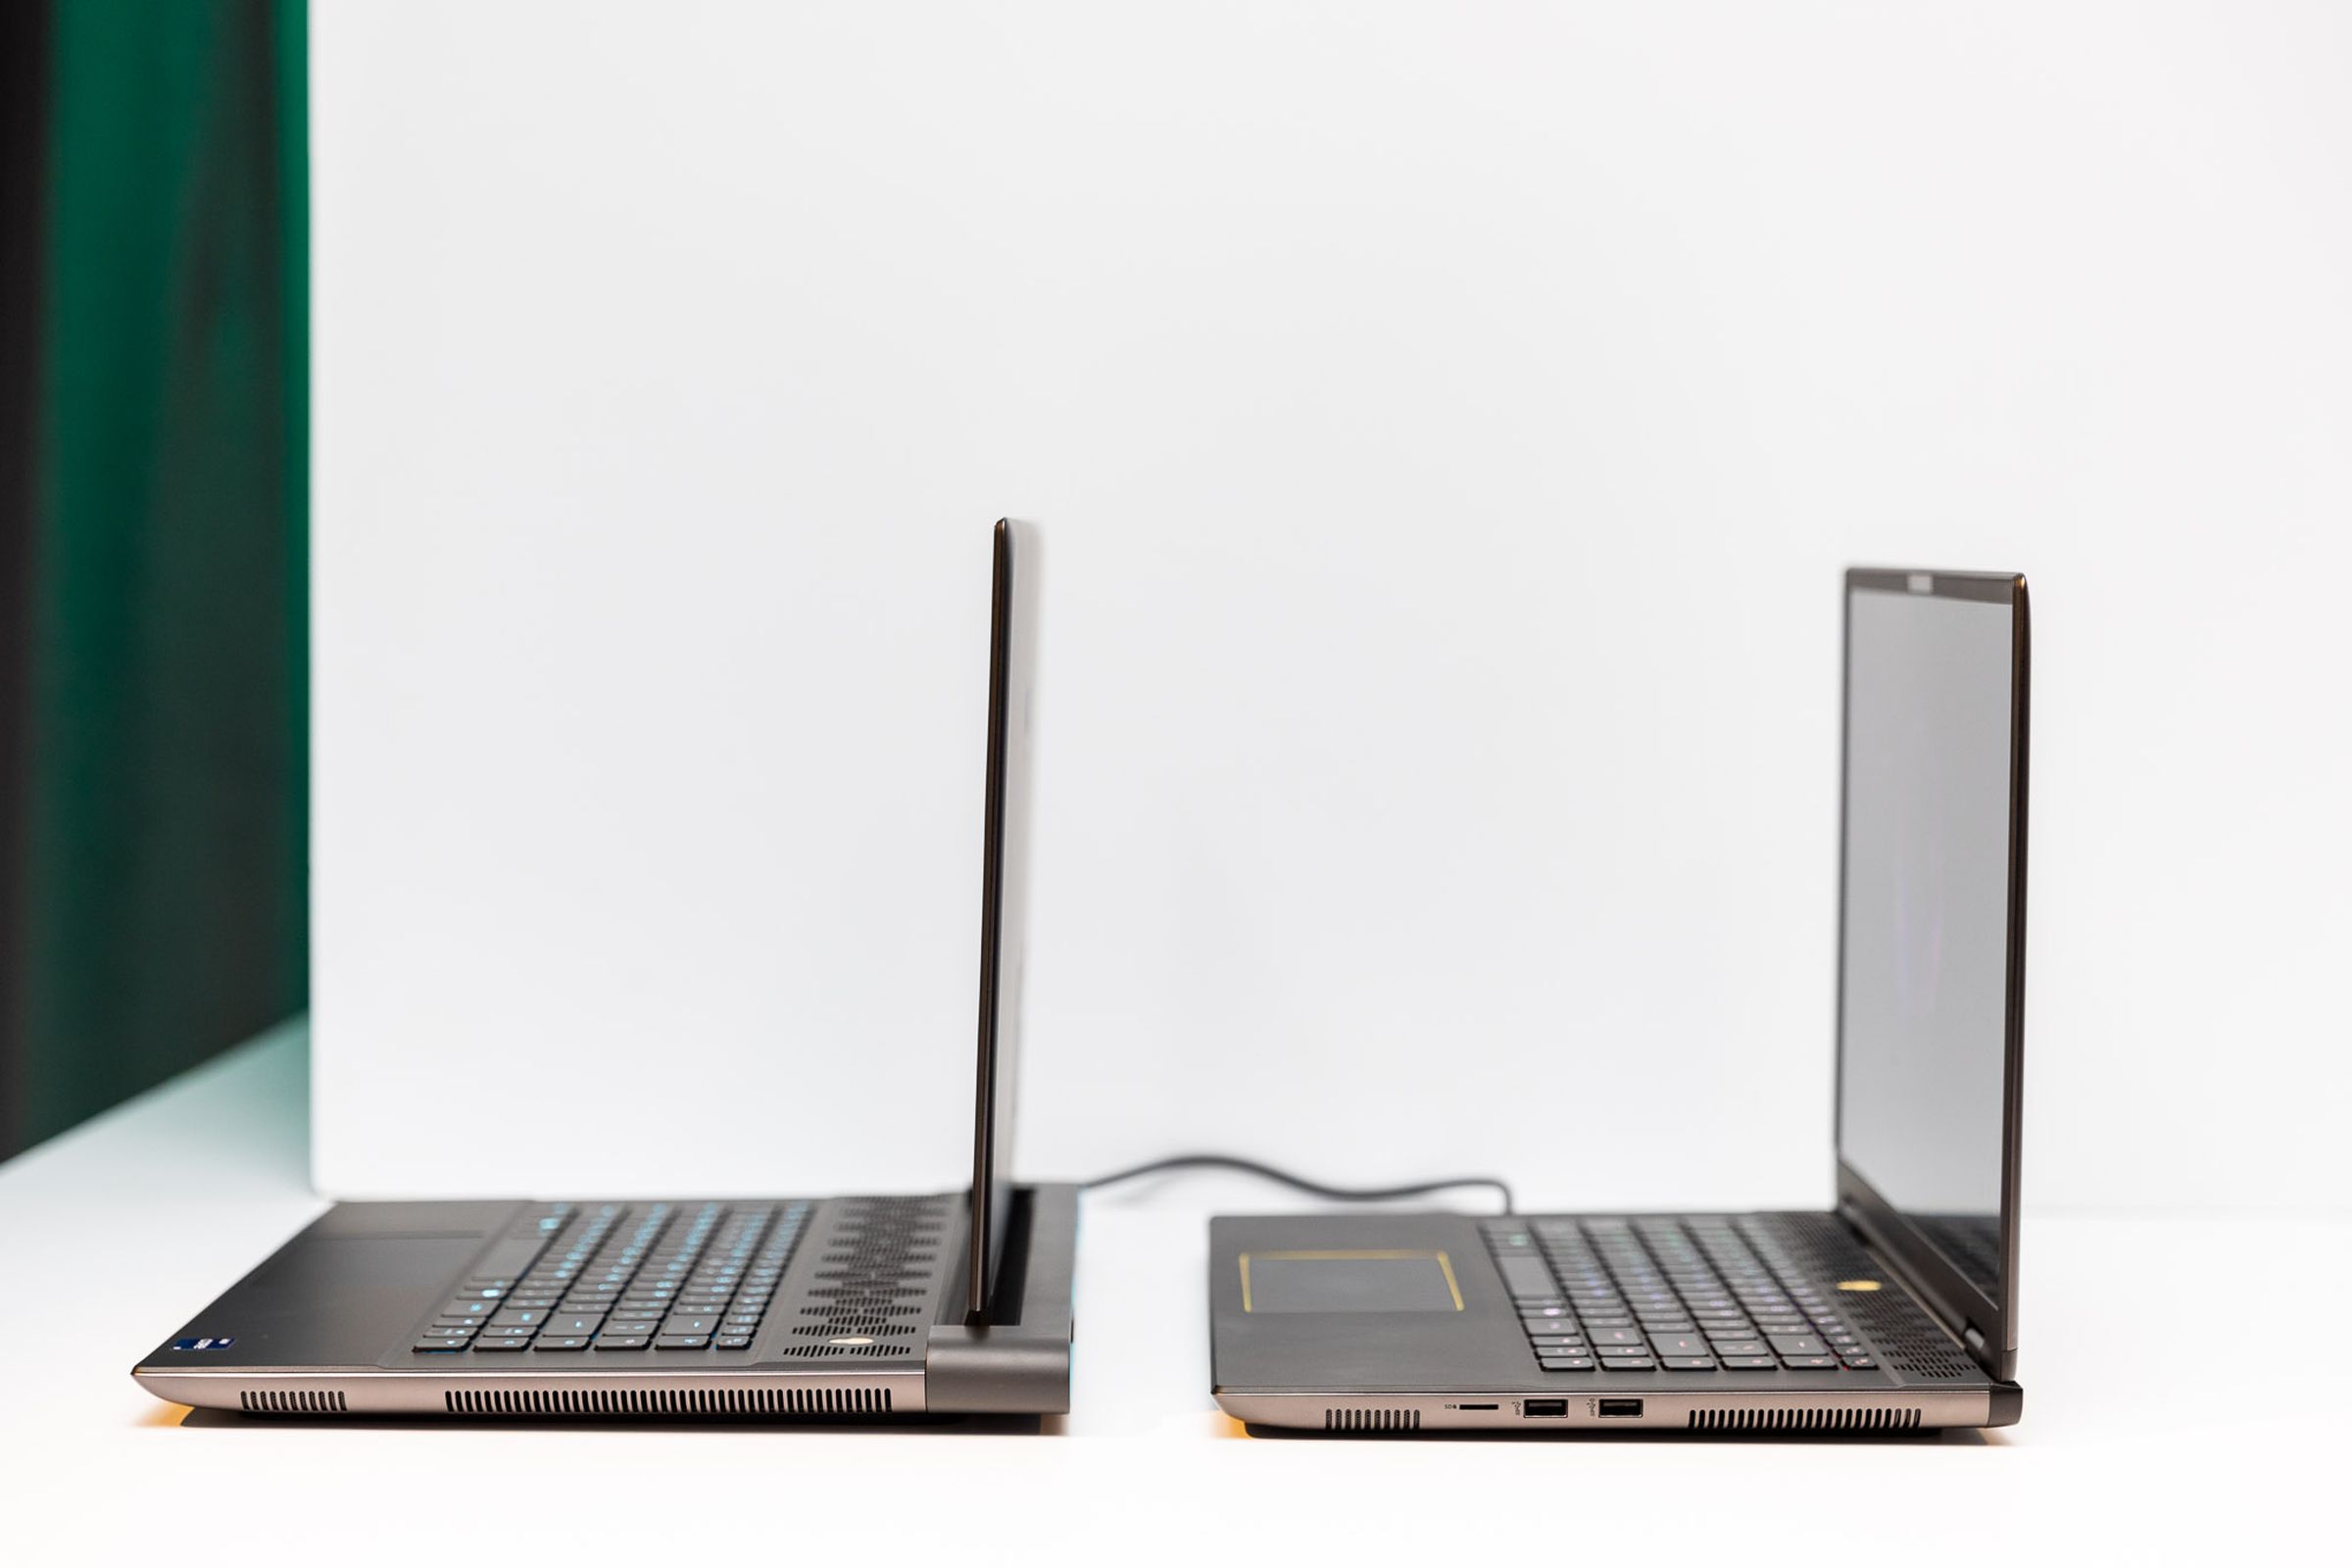 An image of two laptops side by side showcasing that one is about 1.5 inches deeper than the other.